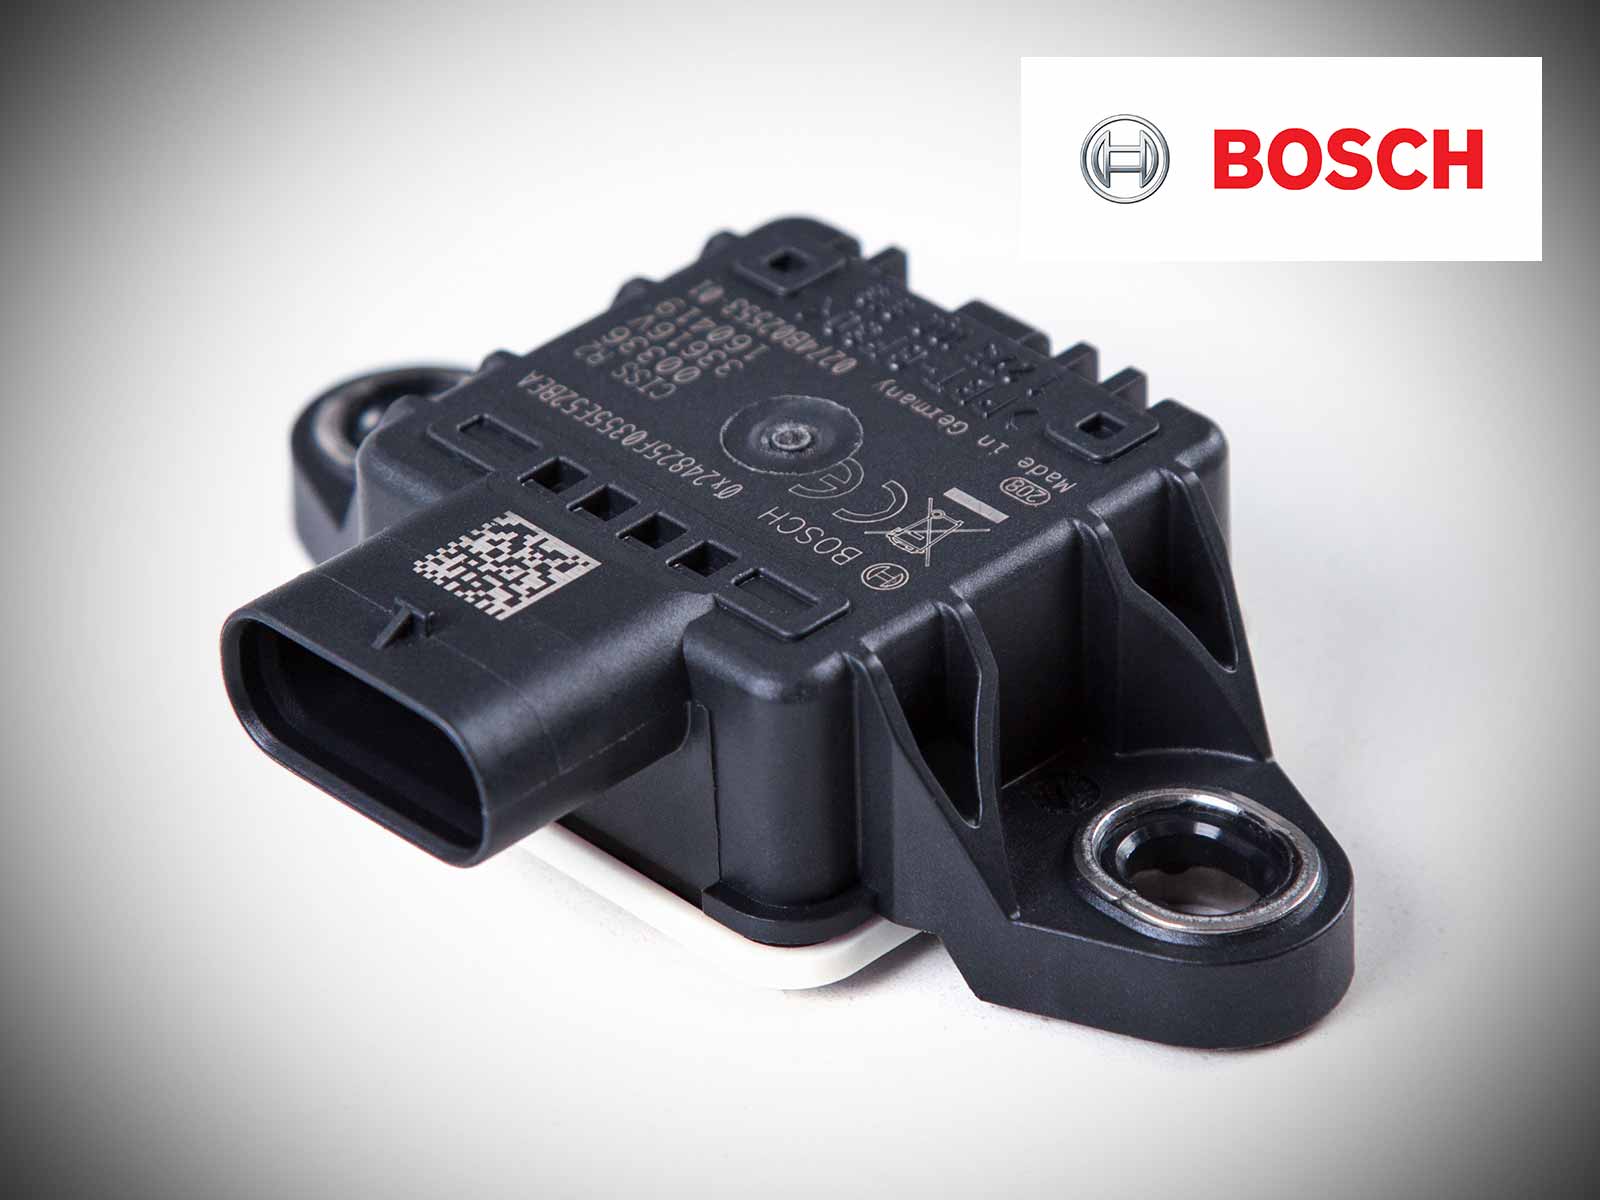 CISS - Connected Industrial Sensor Solution - Bluetooth Sensor von Bosch for Condition Monitoring for machines